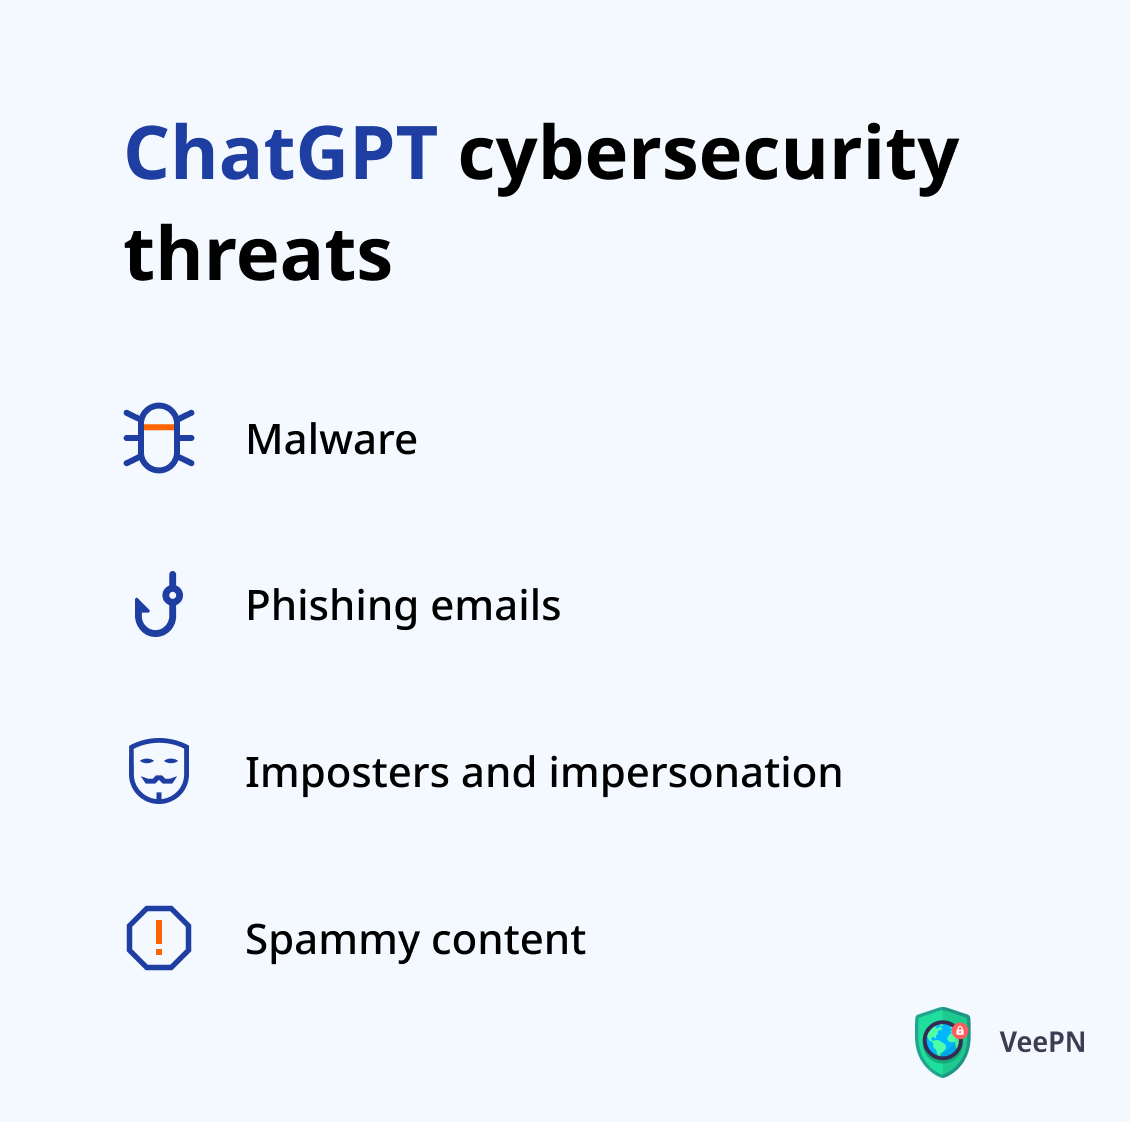 The most common ChatGPT cybersecurity threats.